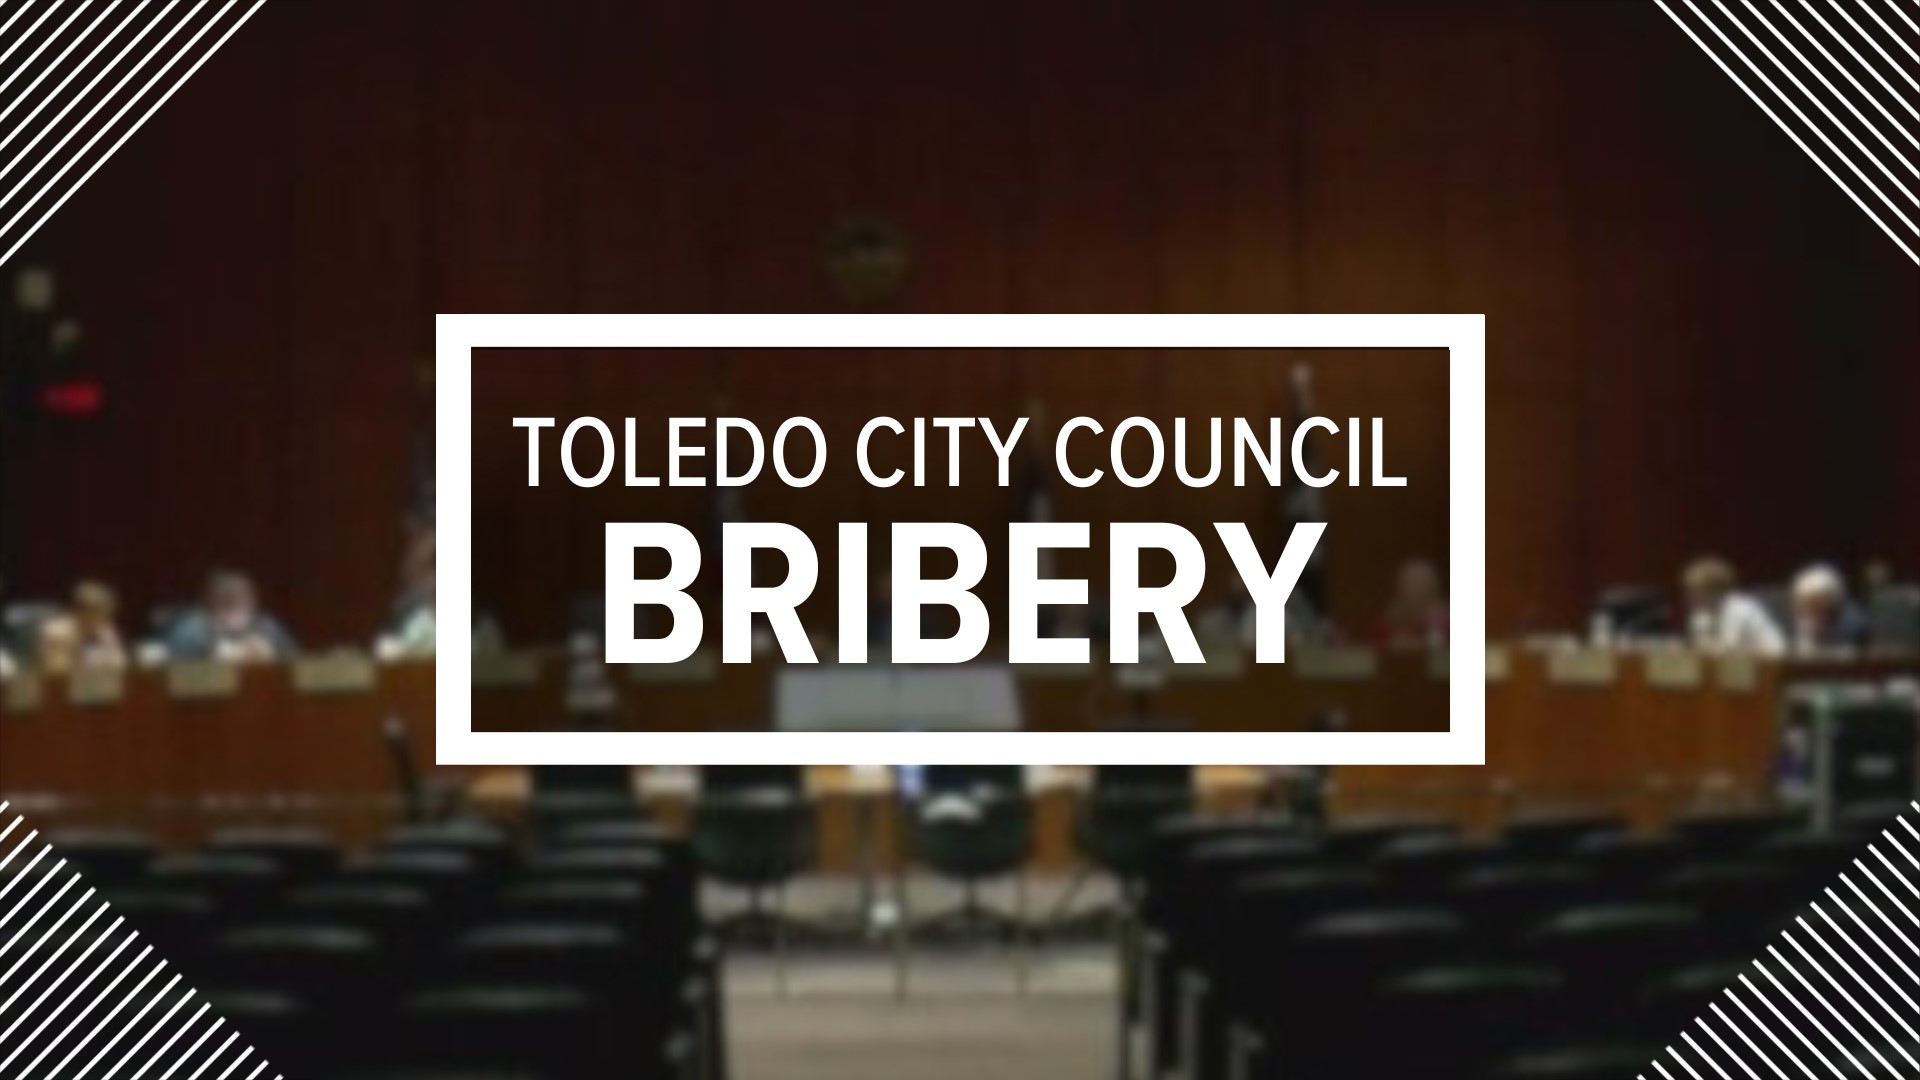 Nabil Shaheen pleaded guilty to extortion charges for allegedly aiding and abetting Tyrone Riley in exchange for Riley's influence as member of Toledo City Council.